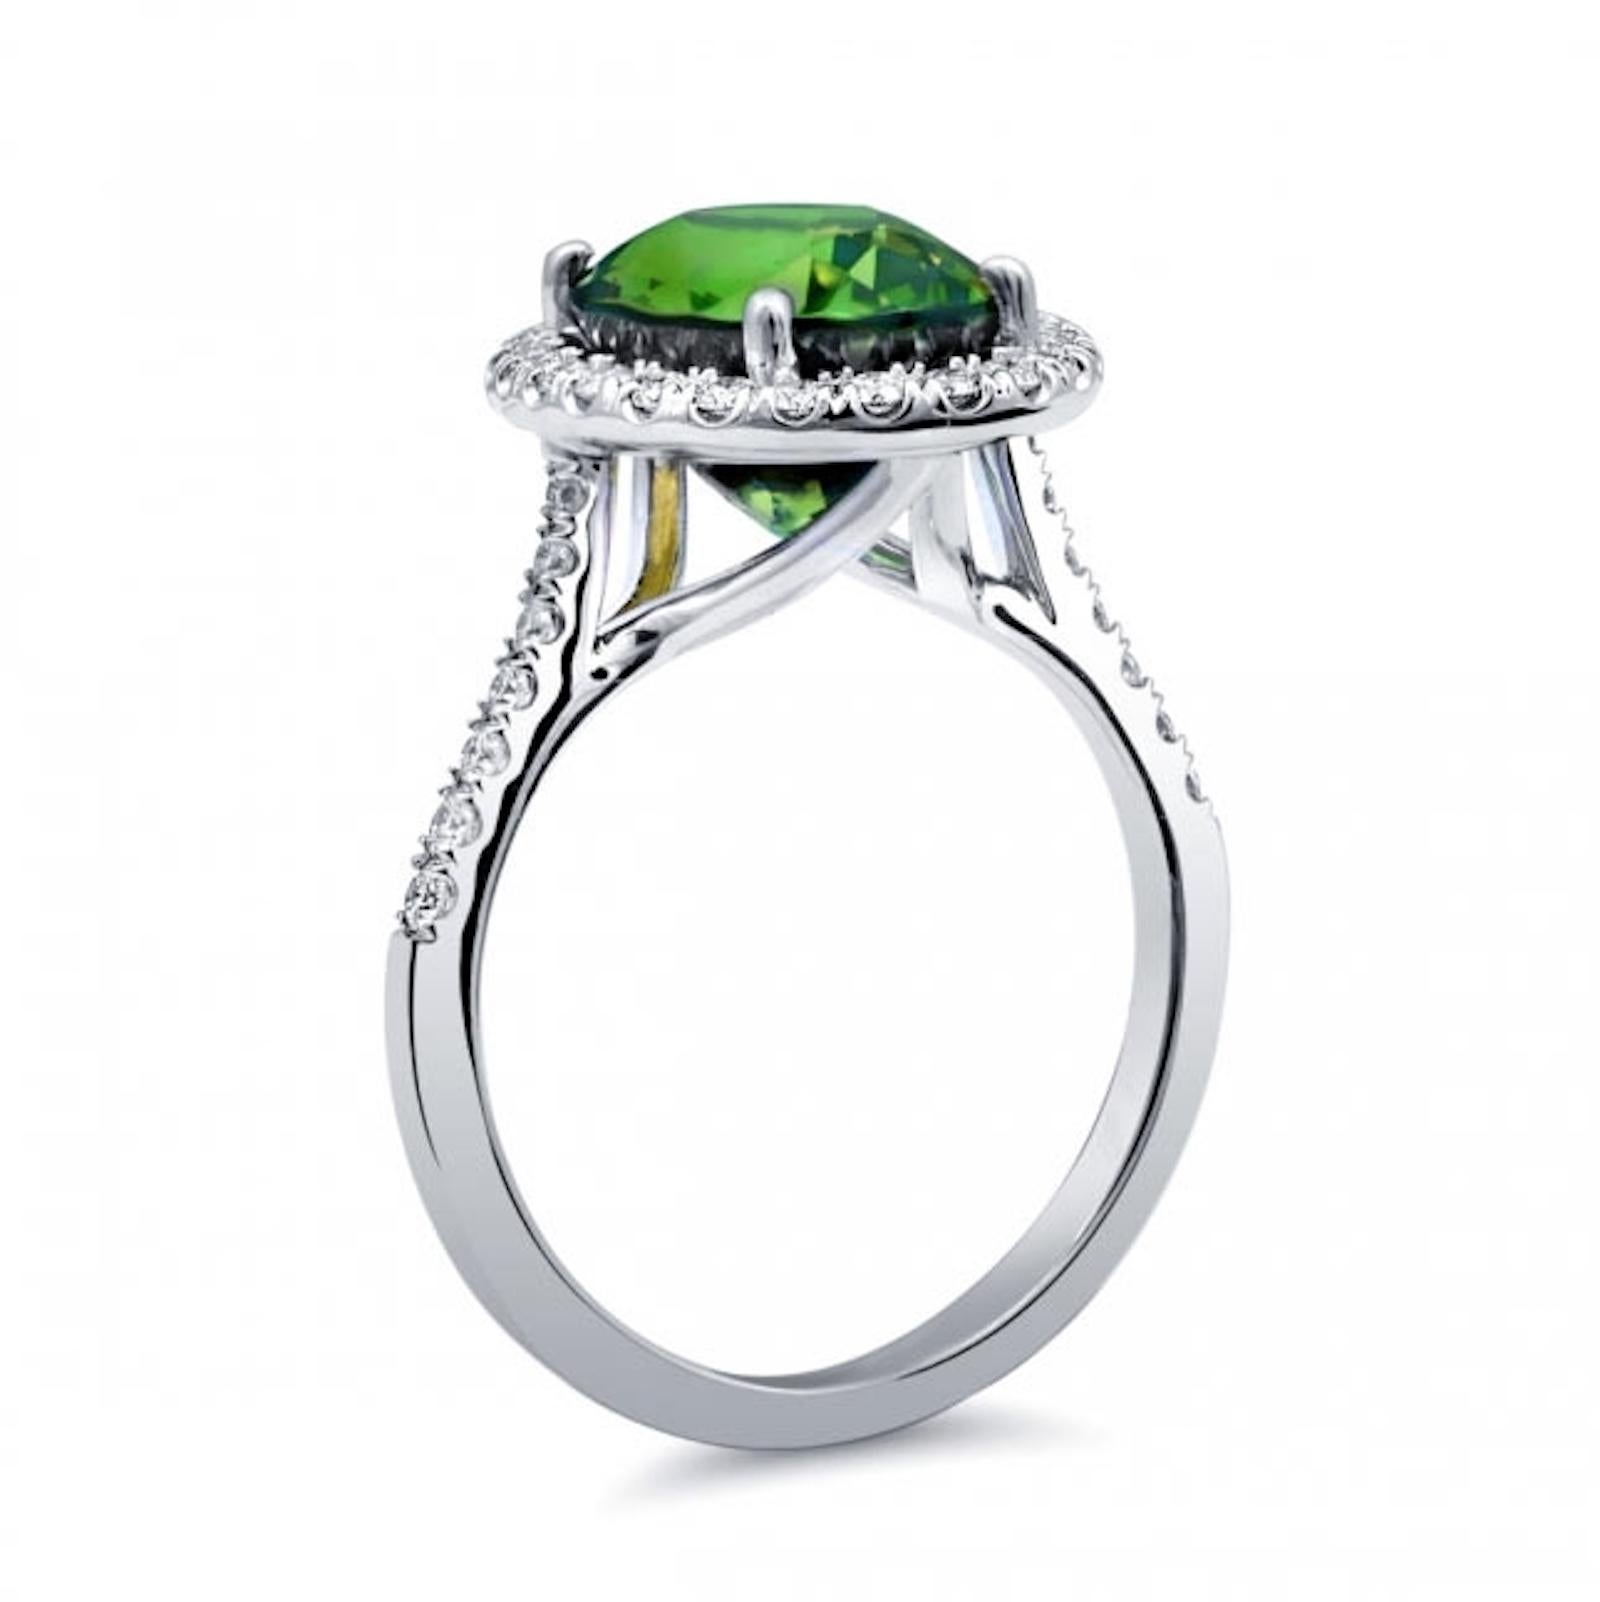 A masterpiece of elegance and natural beauty. Our 14K White Gold Ring features a stunning 4.53-carat Natural Green Tourmaline, exuding strong color intensity and very eye-clean clarity. Accented by 0.39 carats of Diamonds, this ring is a symbol of